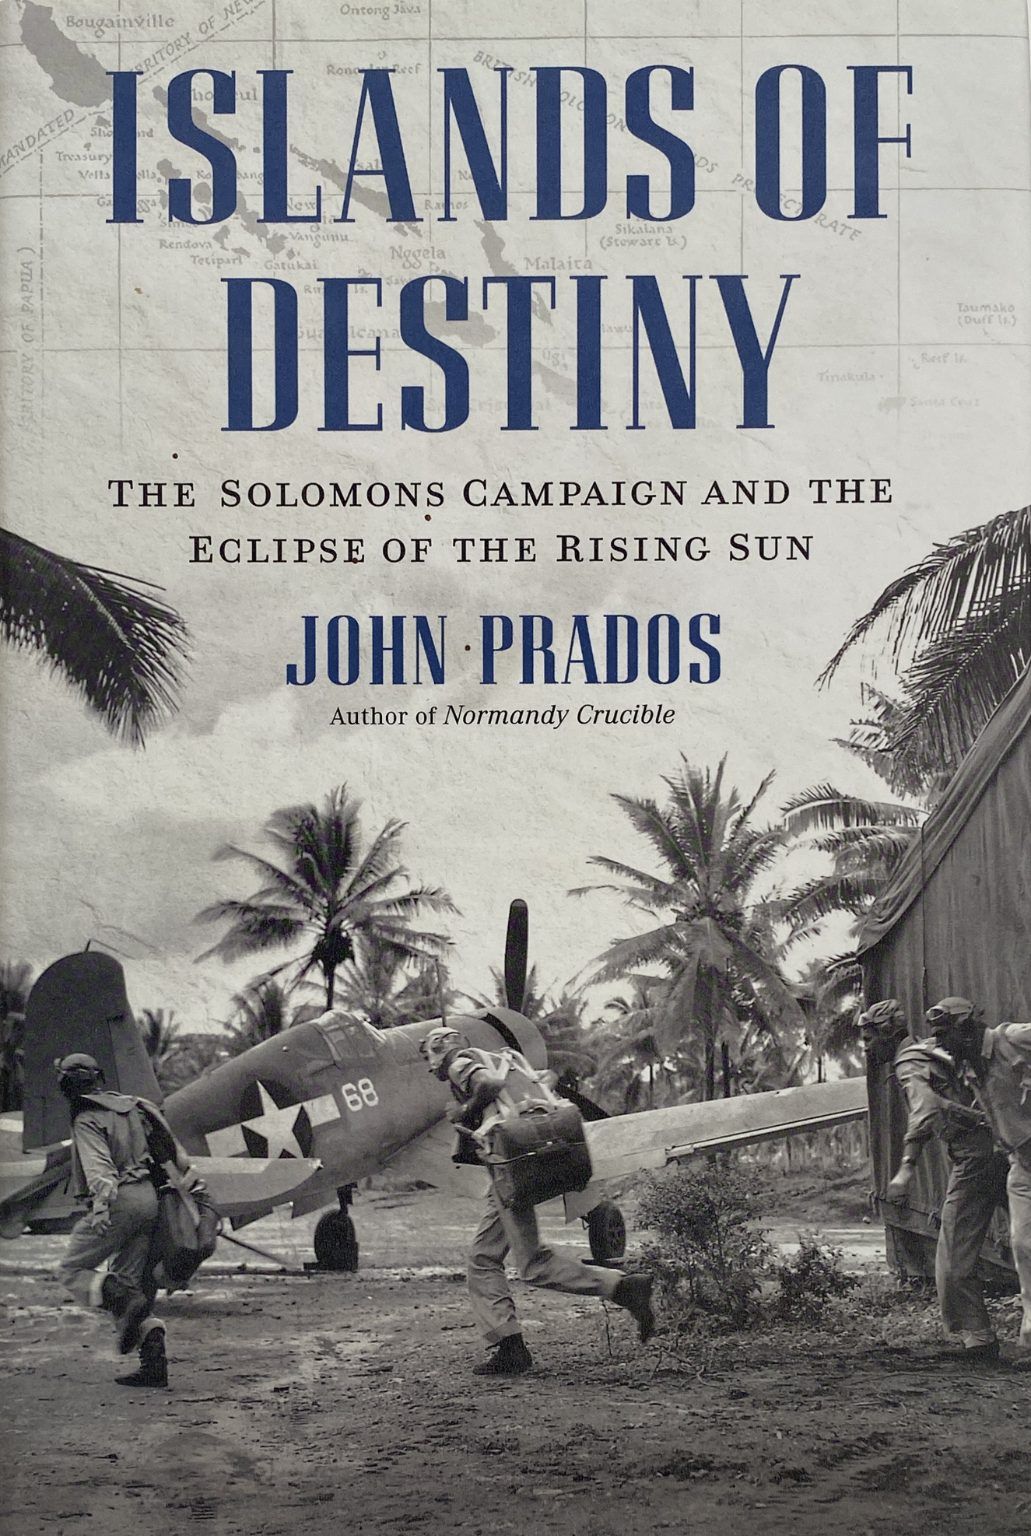 ISLANDS OF DESTINY: The Solomons Campaign and the Eclipse of the Rising Sun